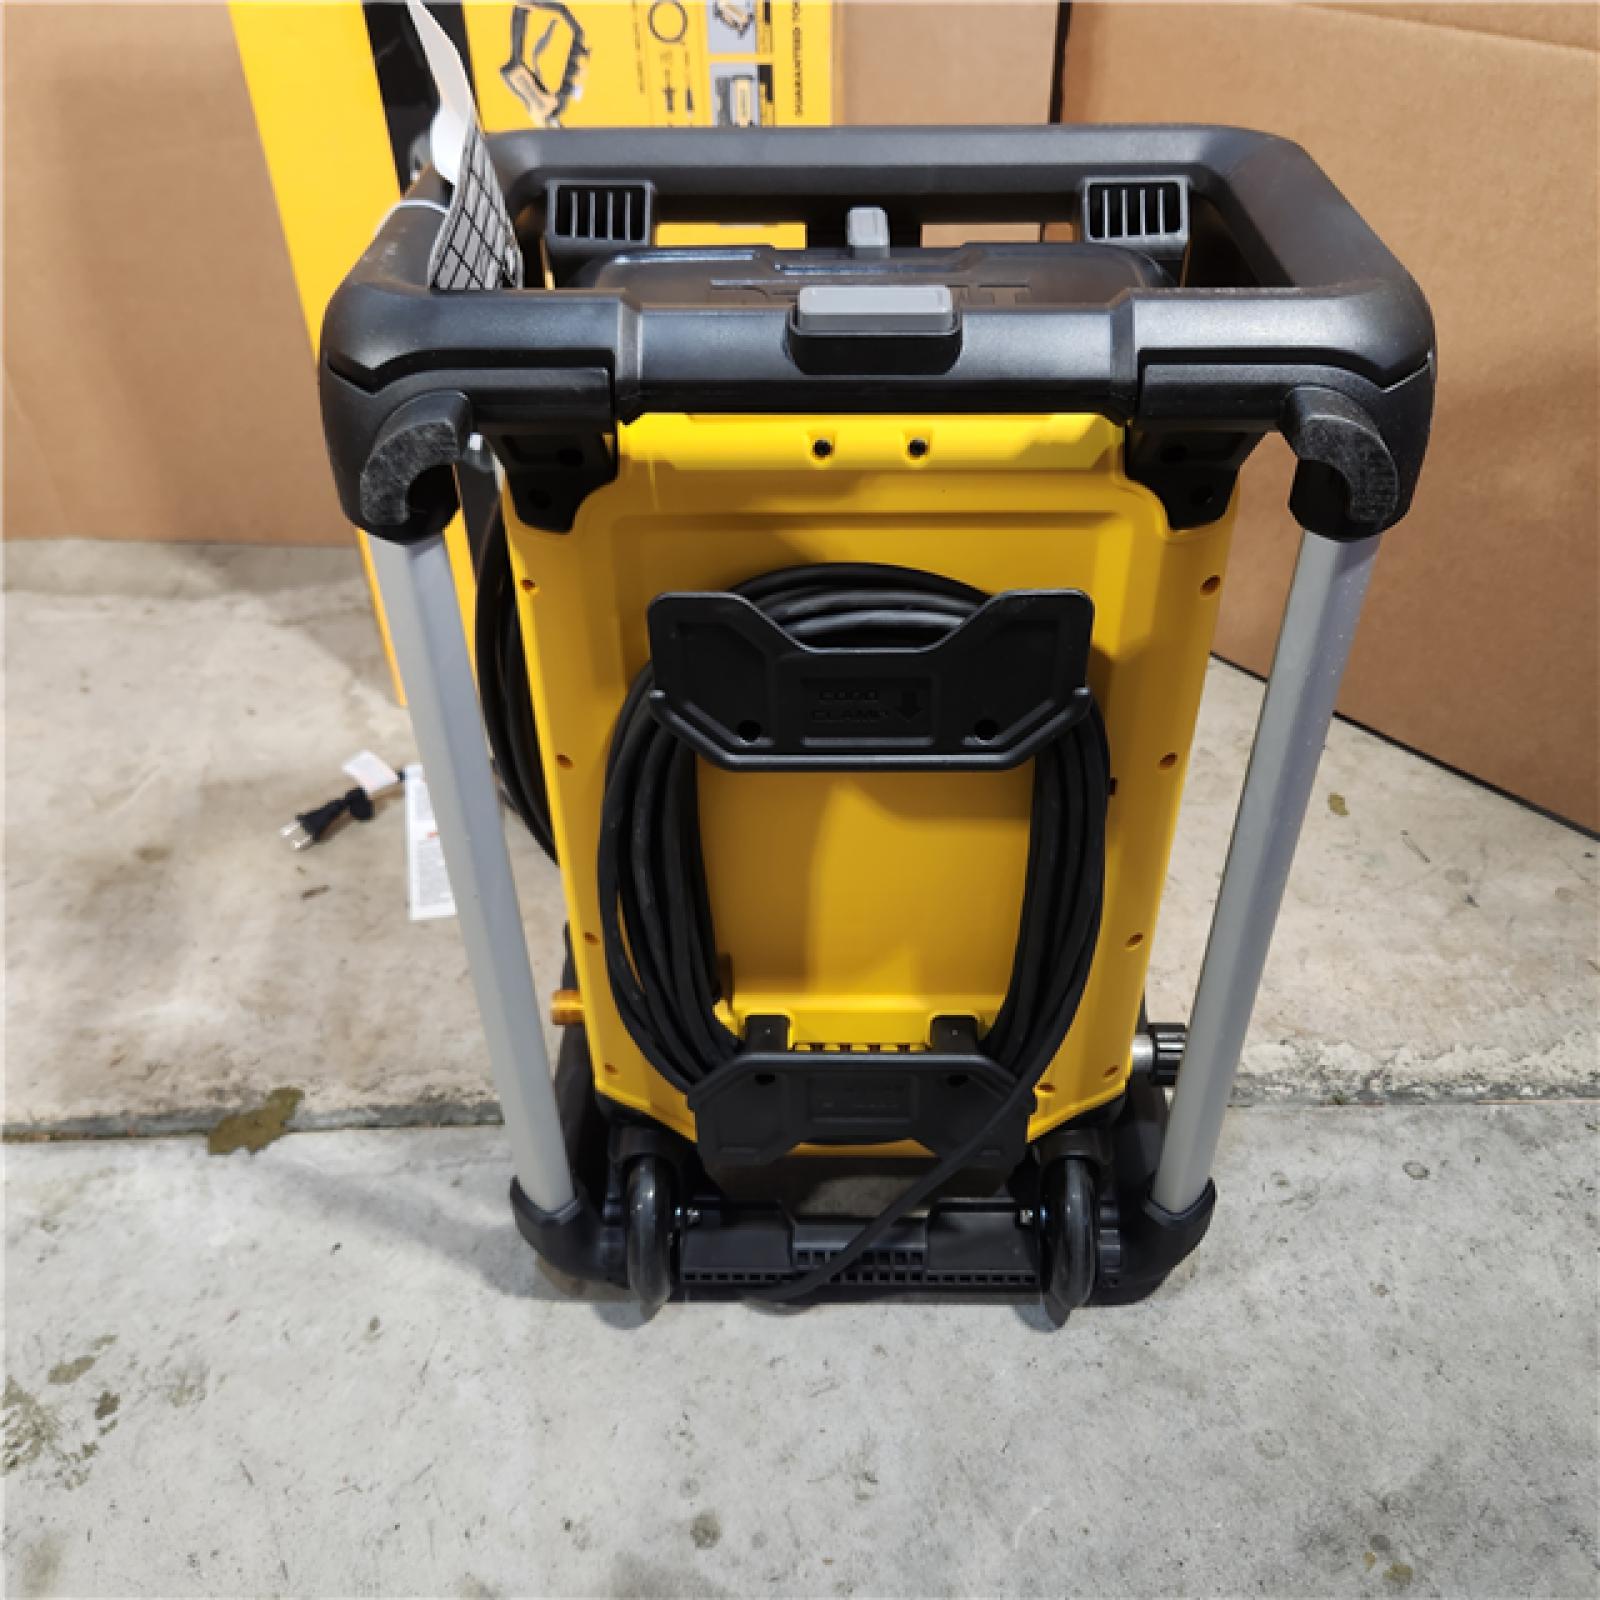 Houston location- AS-IS 104542 13A - 2100 PSI & 1.2 GPM Electric Jobsite Cold Water Pressure Washer